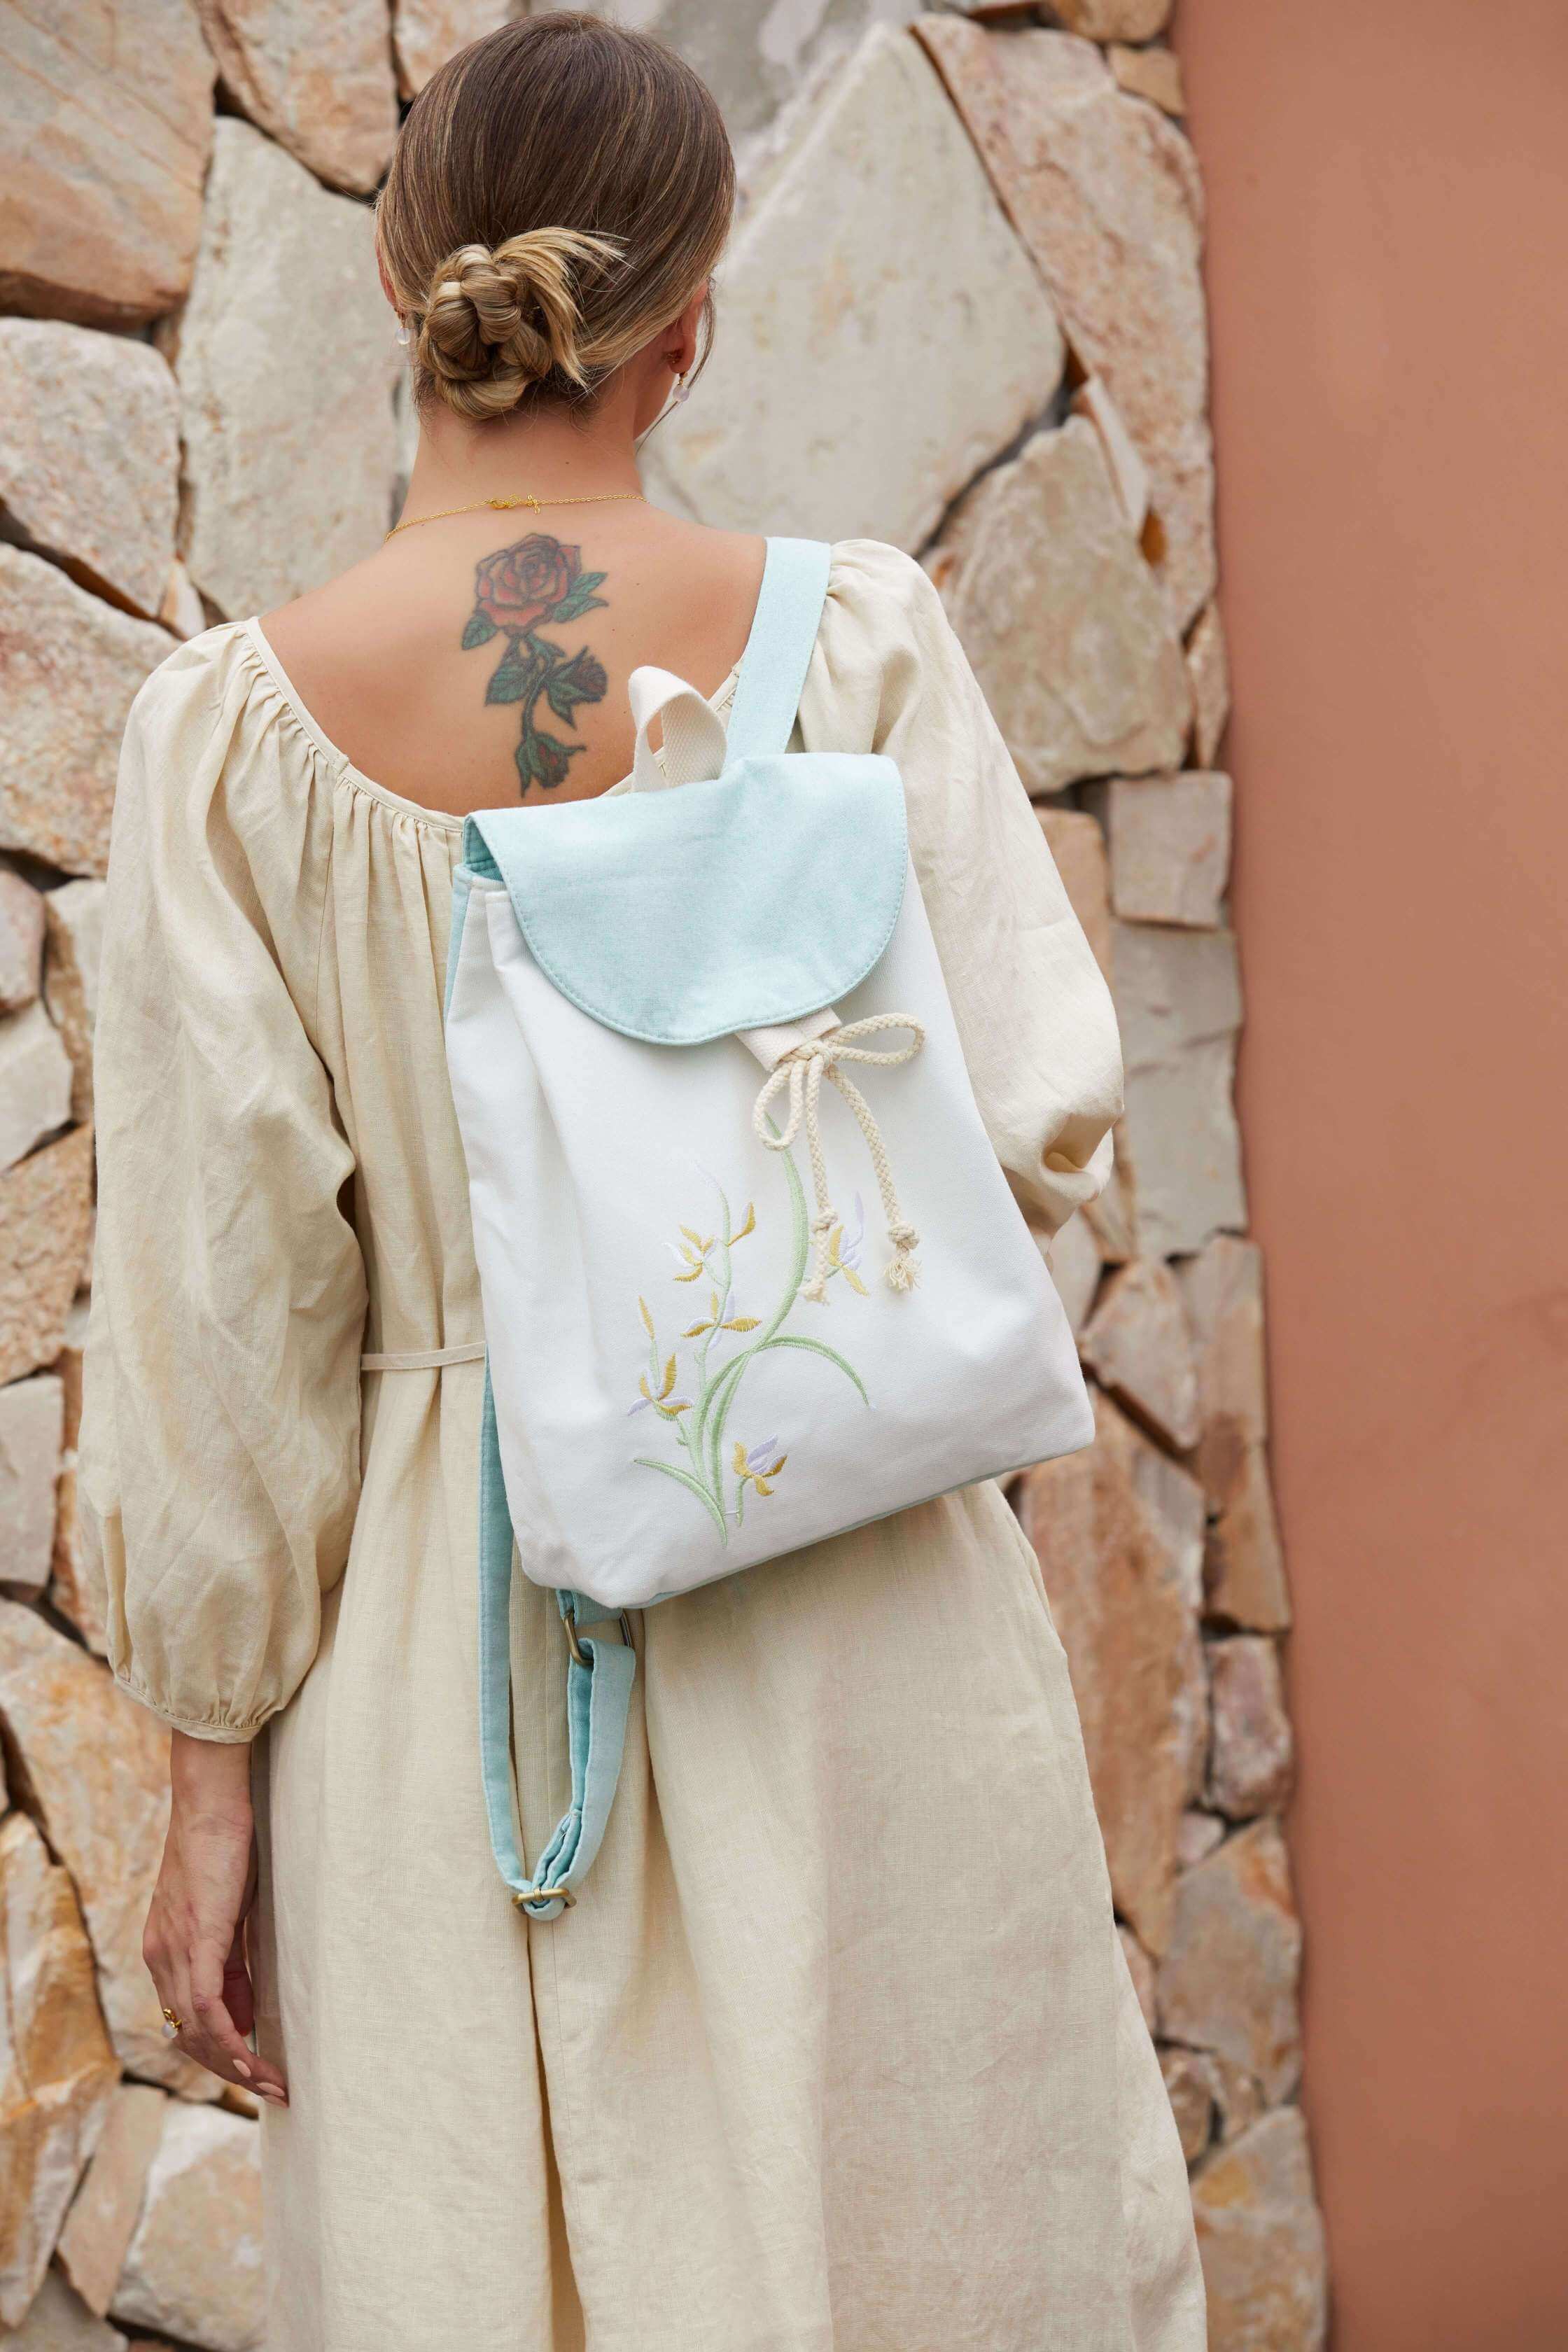 Artistic Large Canvas Backpack with Unique Floral Embroideries